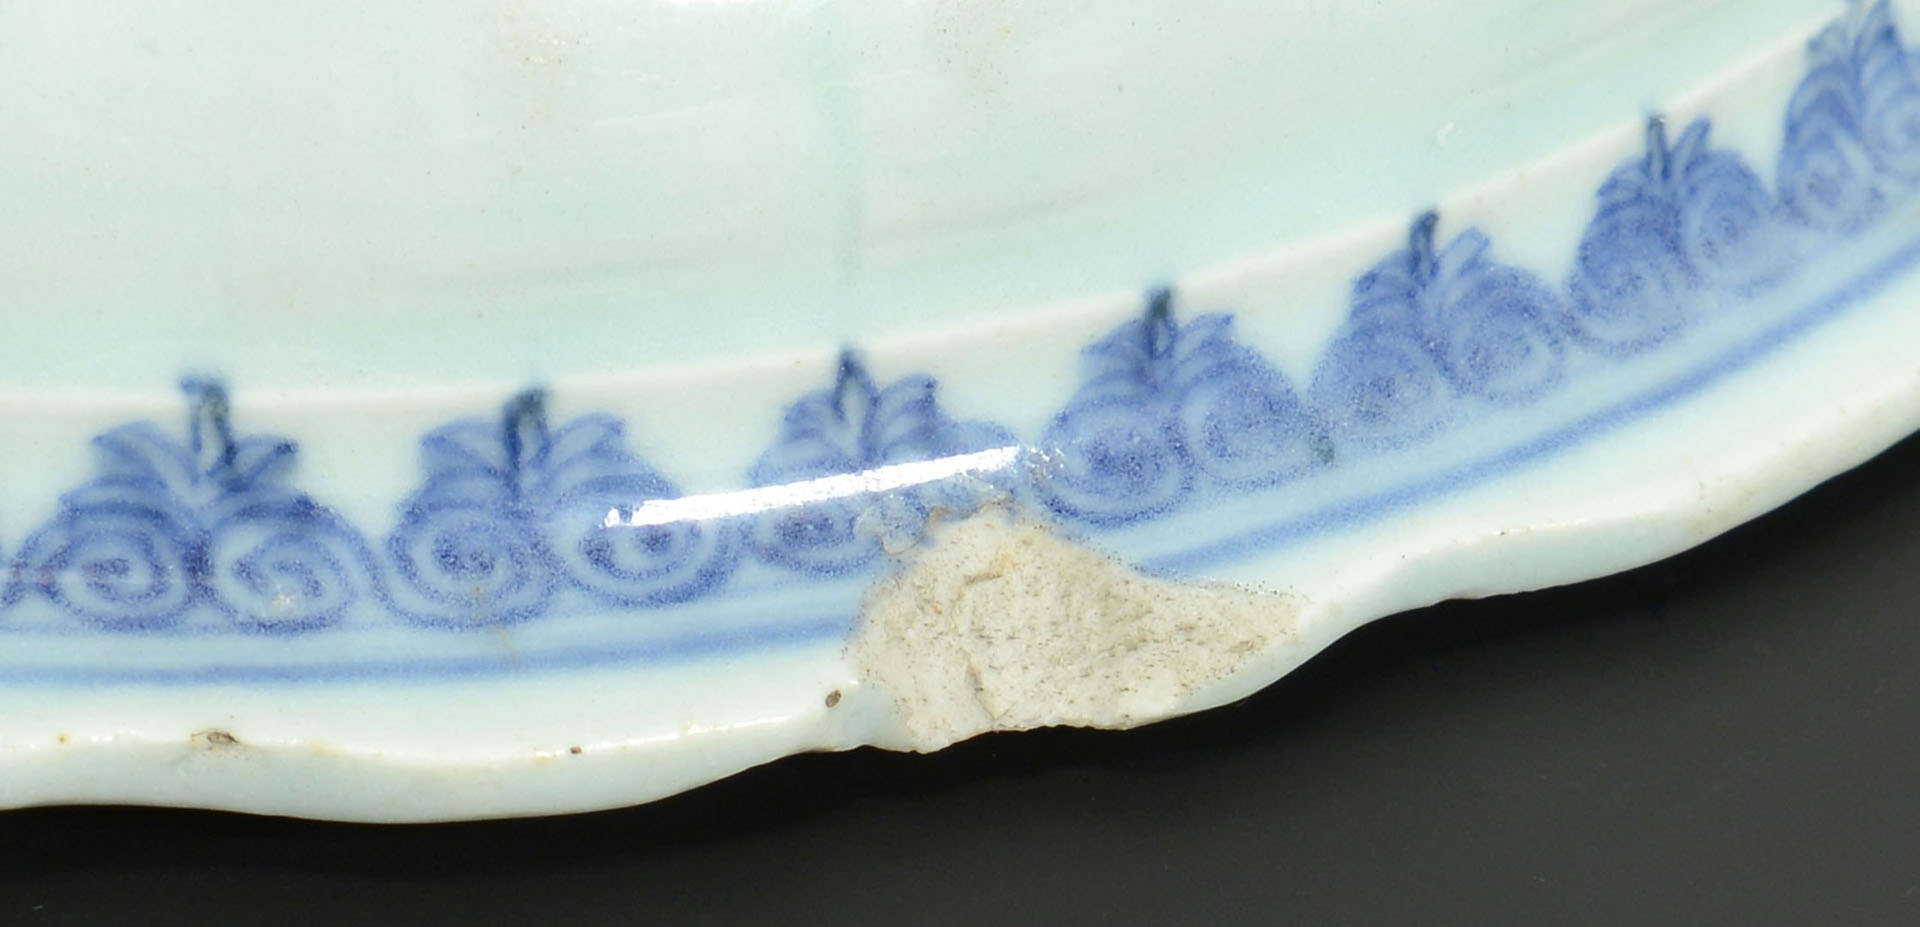 Lot 15: Chinese Export blue and white tureen, pierced cove